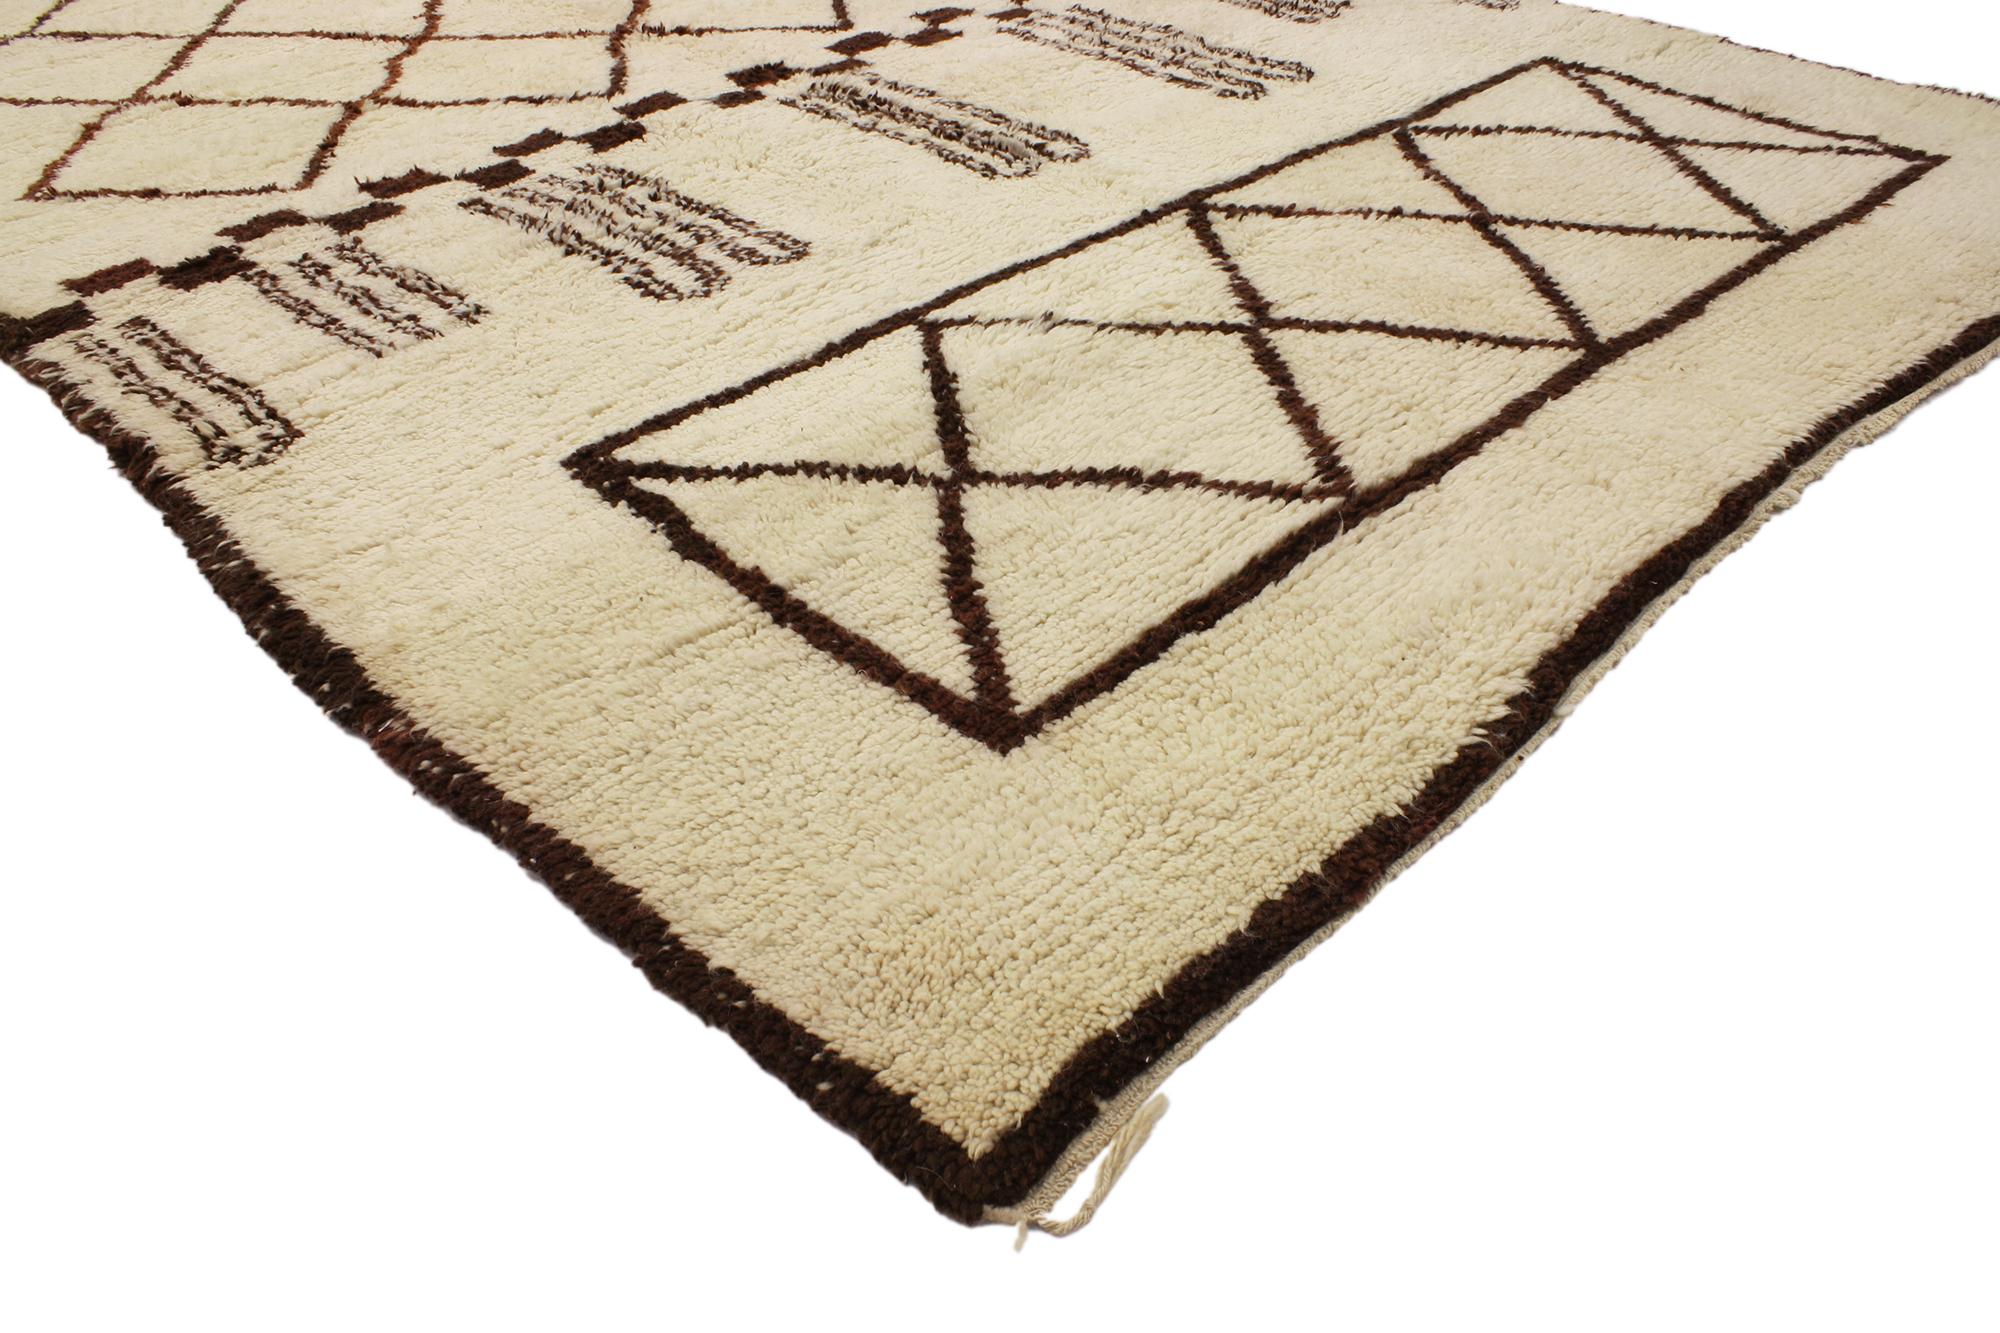 20331 Contemporary Berber Moroccan Rug with Mid-Century Modern Style 06'10 x 11'09. With its simplicity, plush pile and minimalist style, this hand knotted wool contemporary Berber Moroccan rug provides a feeling of cozy contentment without the